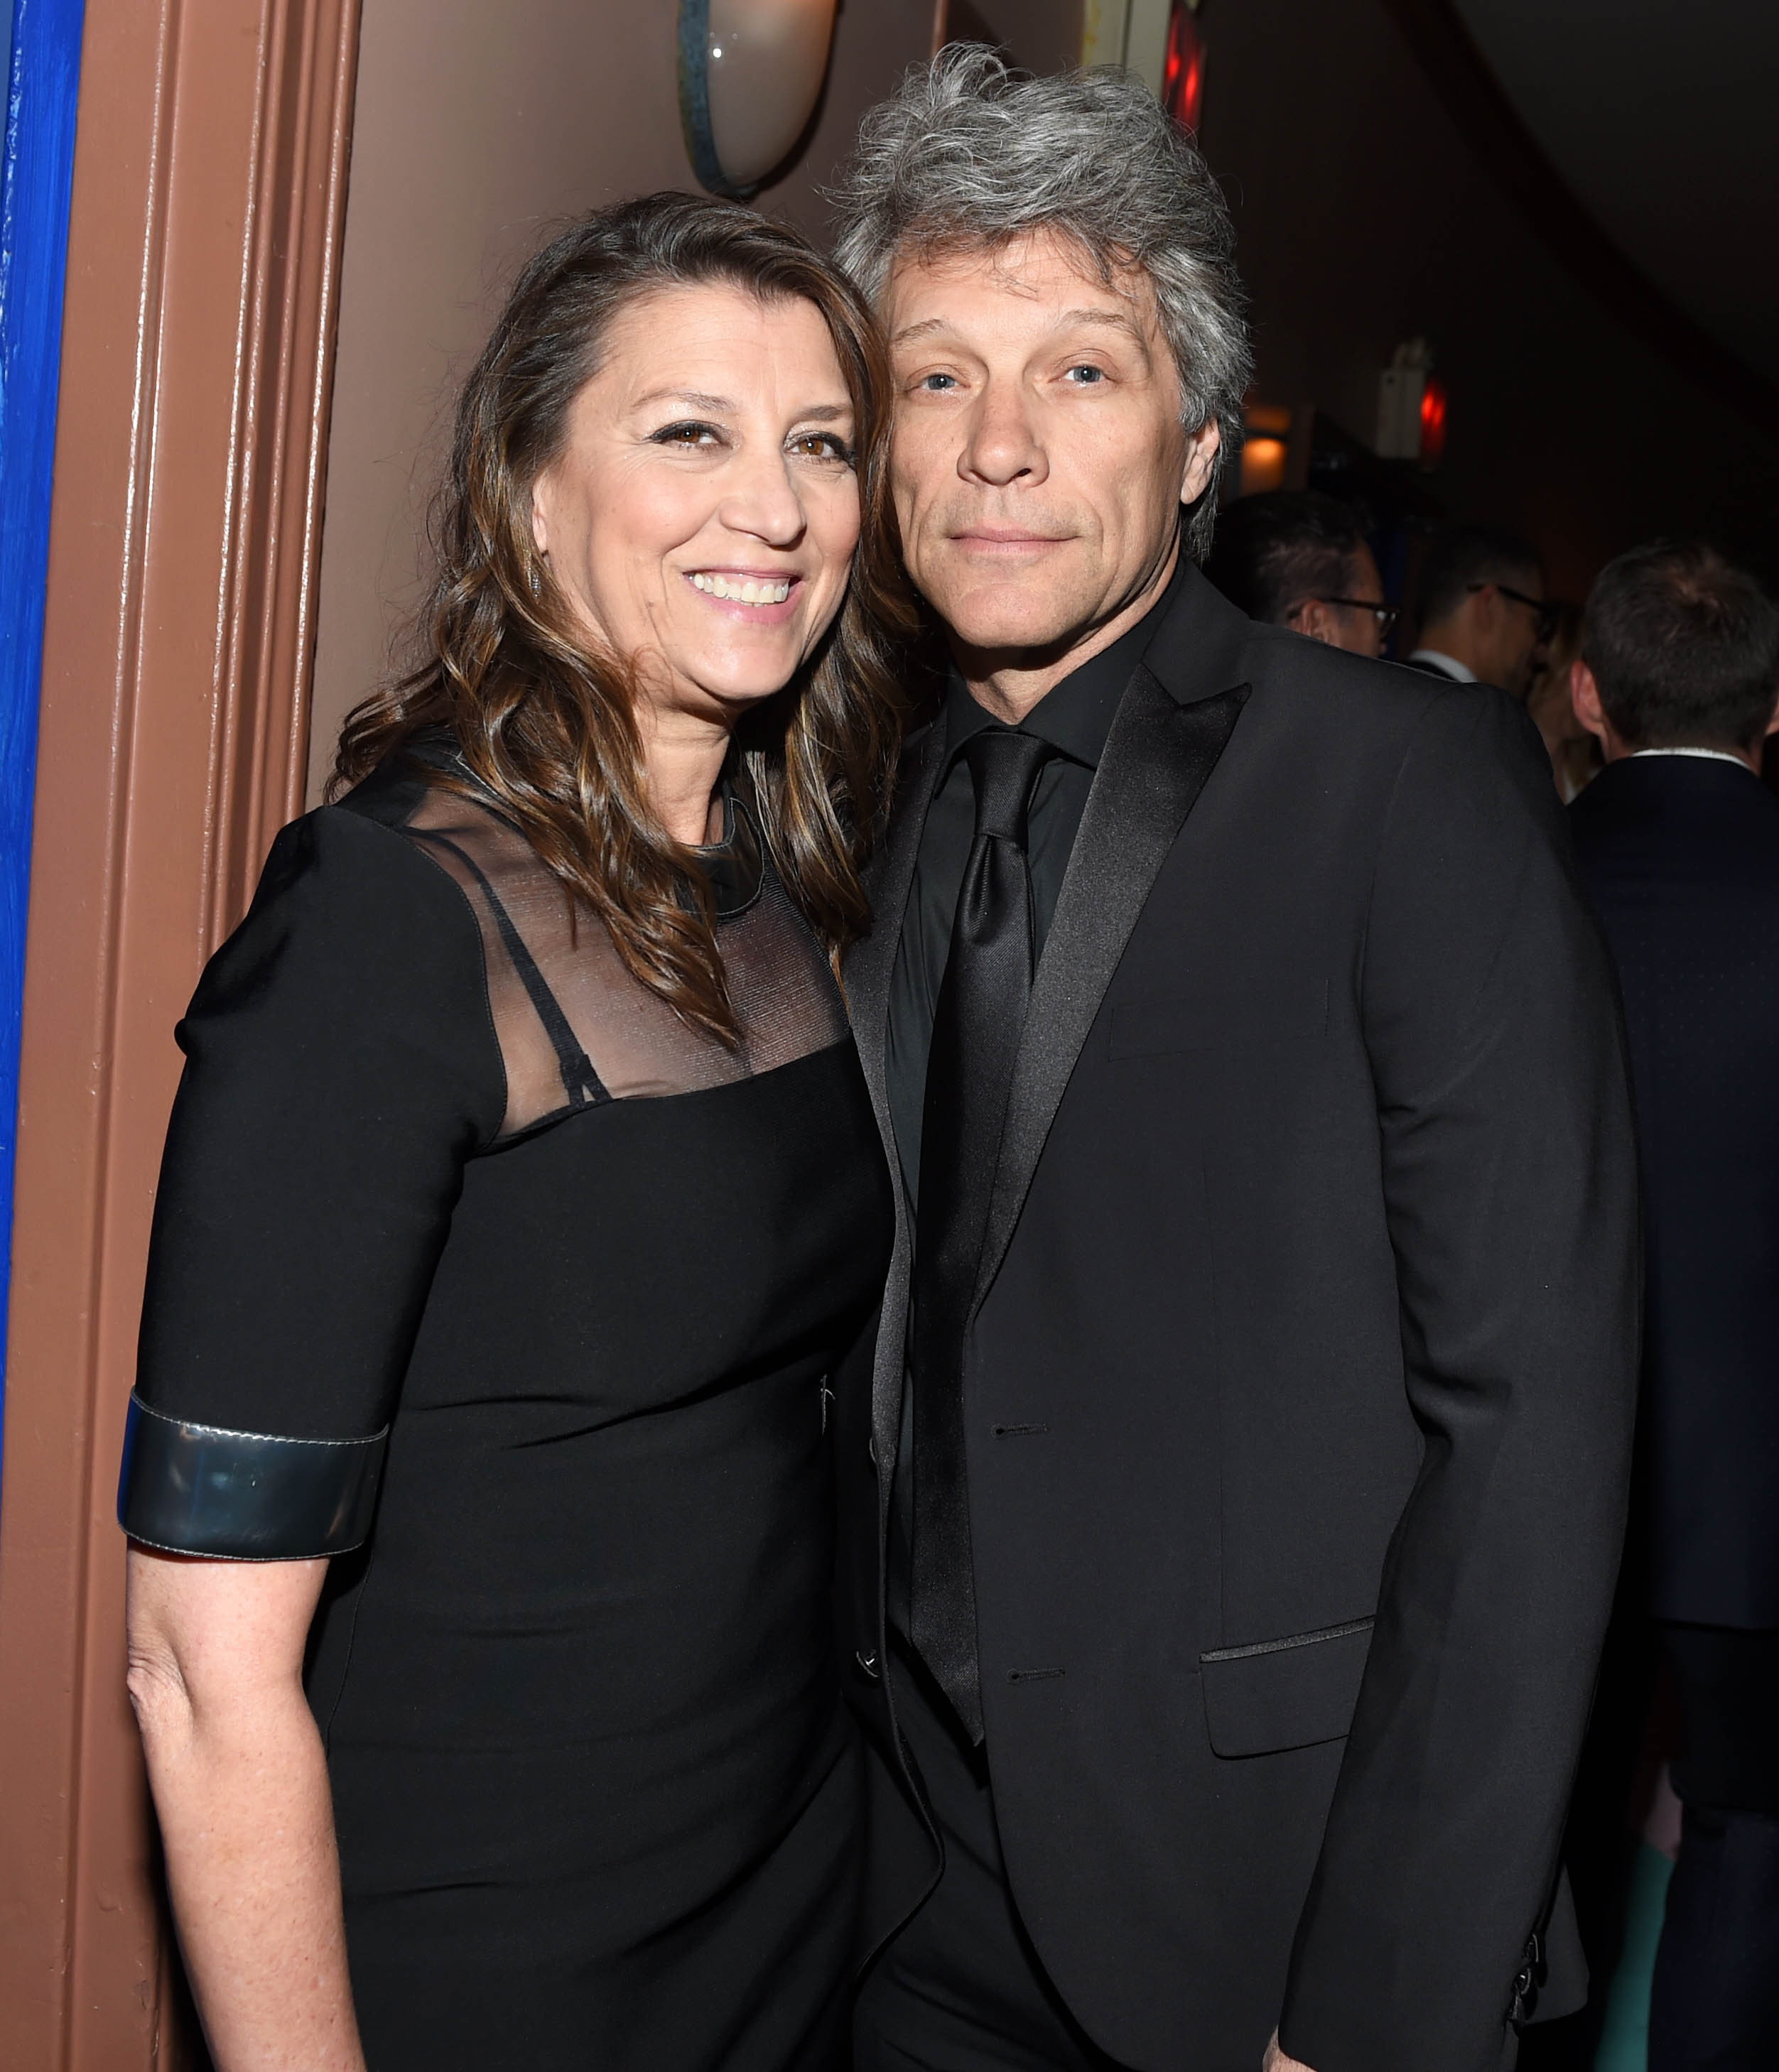 Jon Bon Jovi and wife Dorothea Hurley in New York on June 5, 2017 | Source: Getty Images